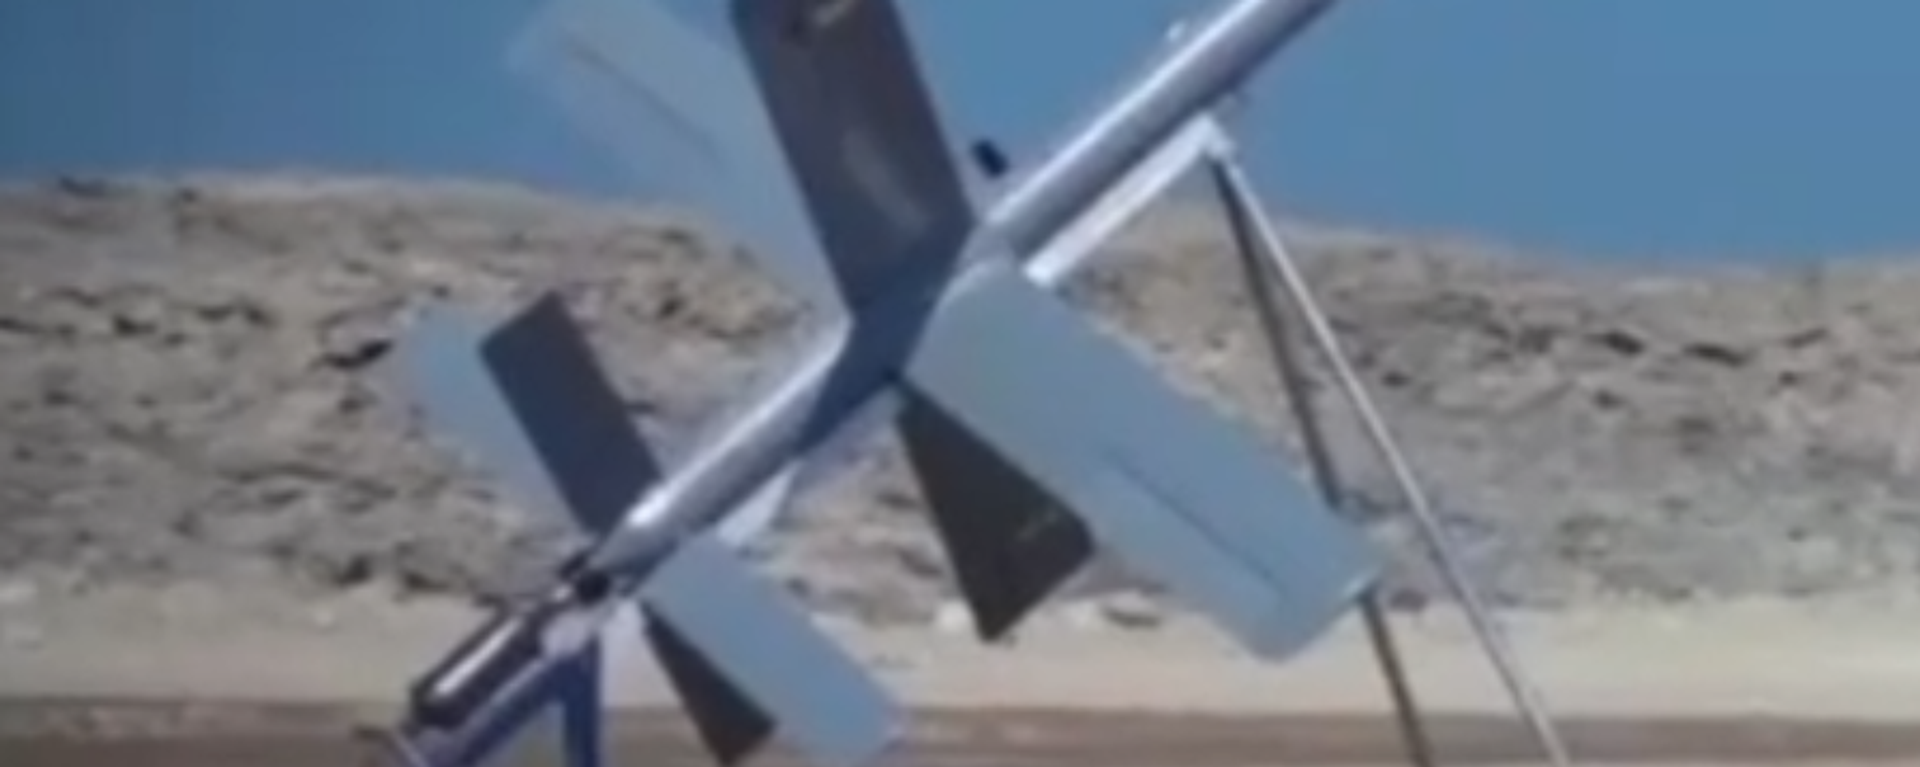 Screenshot of Tasnim video showing new Iranian drone design with wings similar to Russia's distinctive Lancet series of loitering munitions. - Sputnik International, 1920, 28.04.2024